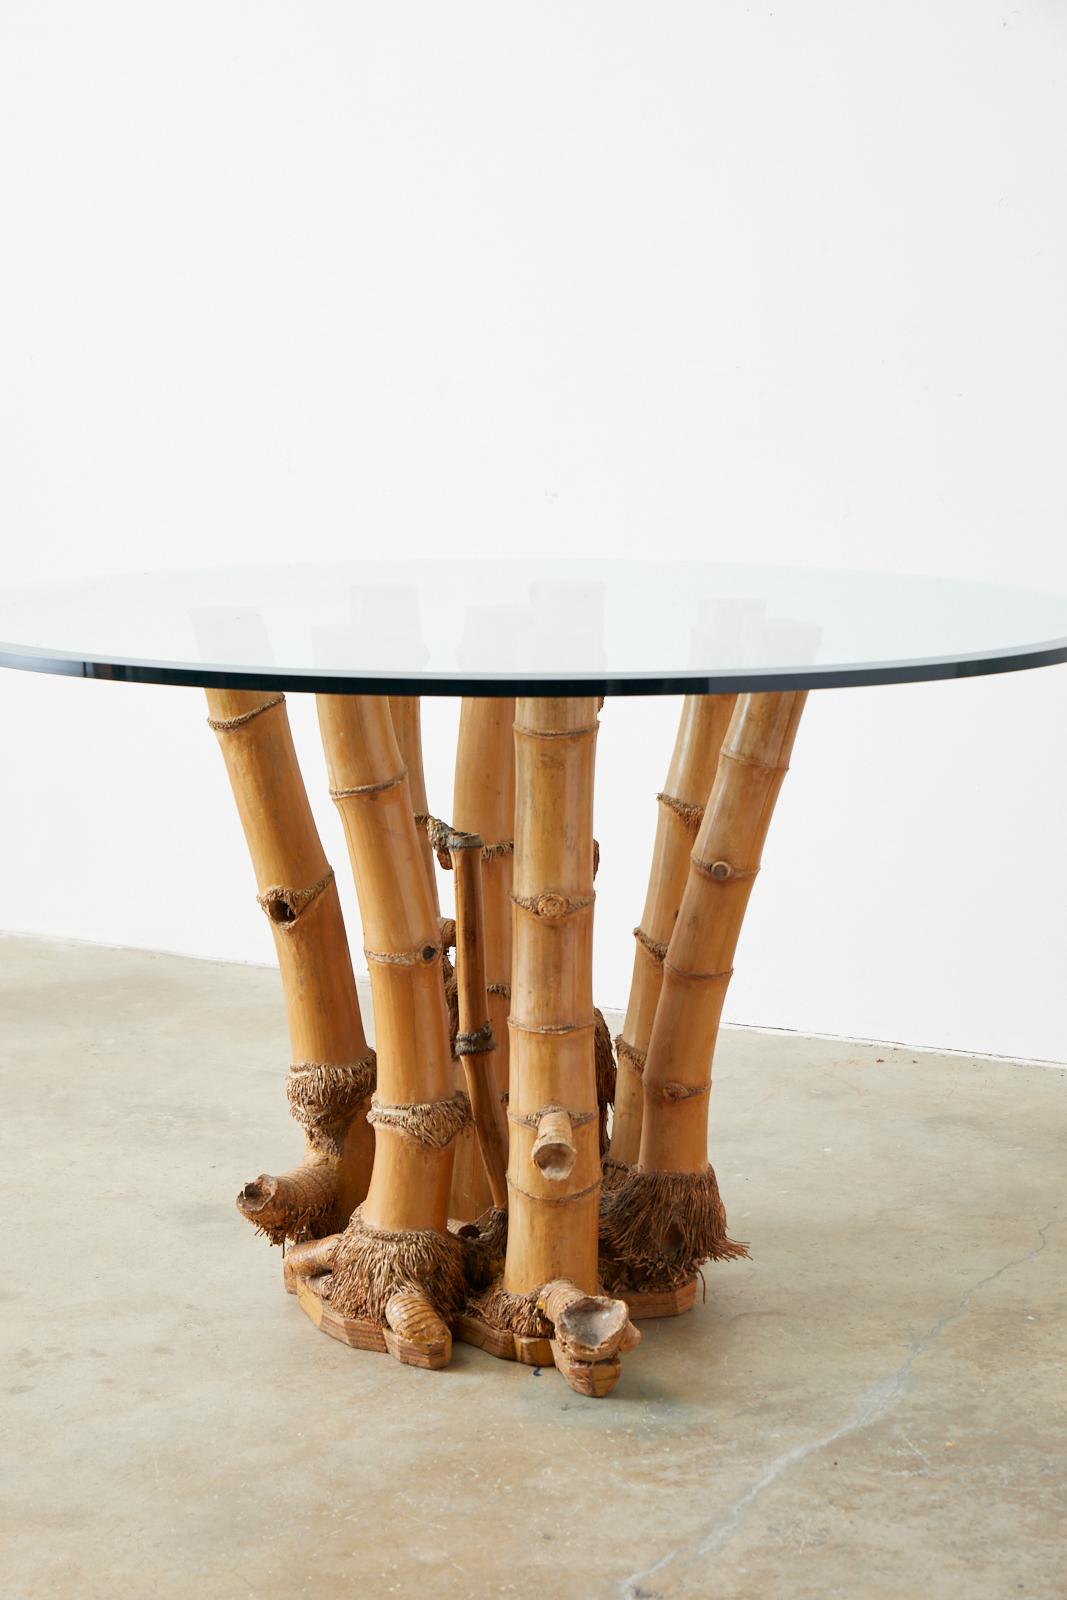 Large round glass top dining table featuring an organic modern style bamboo root base. Rare 8-leg bamboo stalks with their roots and base intact which is seldom seen usually only when the farms and trees are retired. Topped with a .75 inch thick